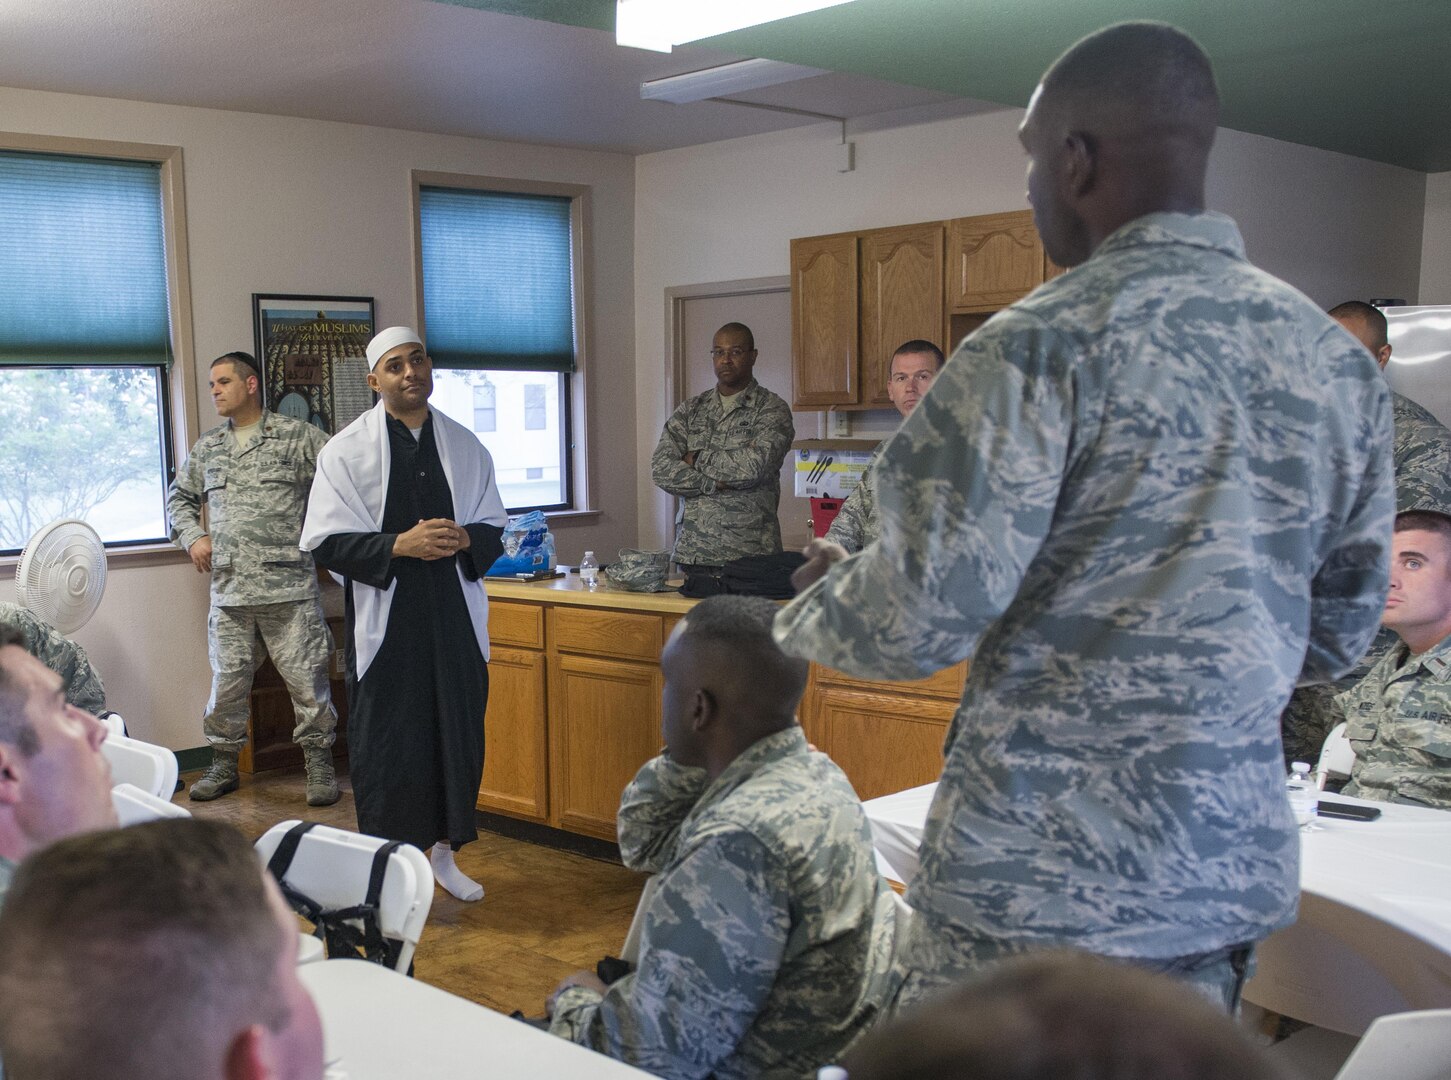 Chaplain (Capt.) Rafael Lantigua, 502nd Air Base Wing Islamic imam, answers chaplain candidates’ questions during a High Demand Low Density panel at Joint Base San Antonio-Lackland, Texas, June 30, 2017. The panel was composed of chaplains of faith dominations who were, despite their low numbers, in high demand based on the military’s population. The HDLD panel was part of the Total Force Air Force Chaplain Candidate Intensive Internship, which was touring seven bases to include JBSA-Lackland. (U.S. Air Force photo by Senior Airman Krystal Wright)